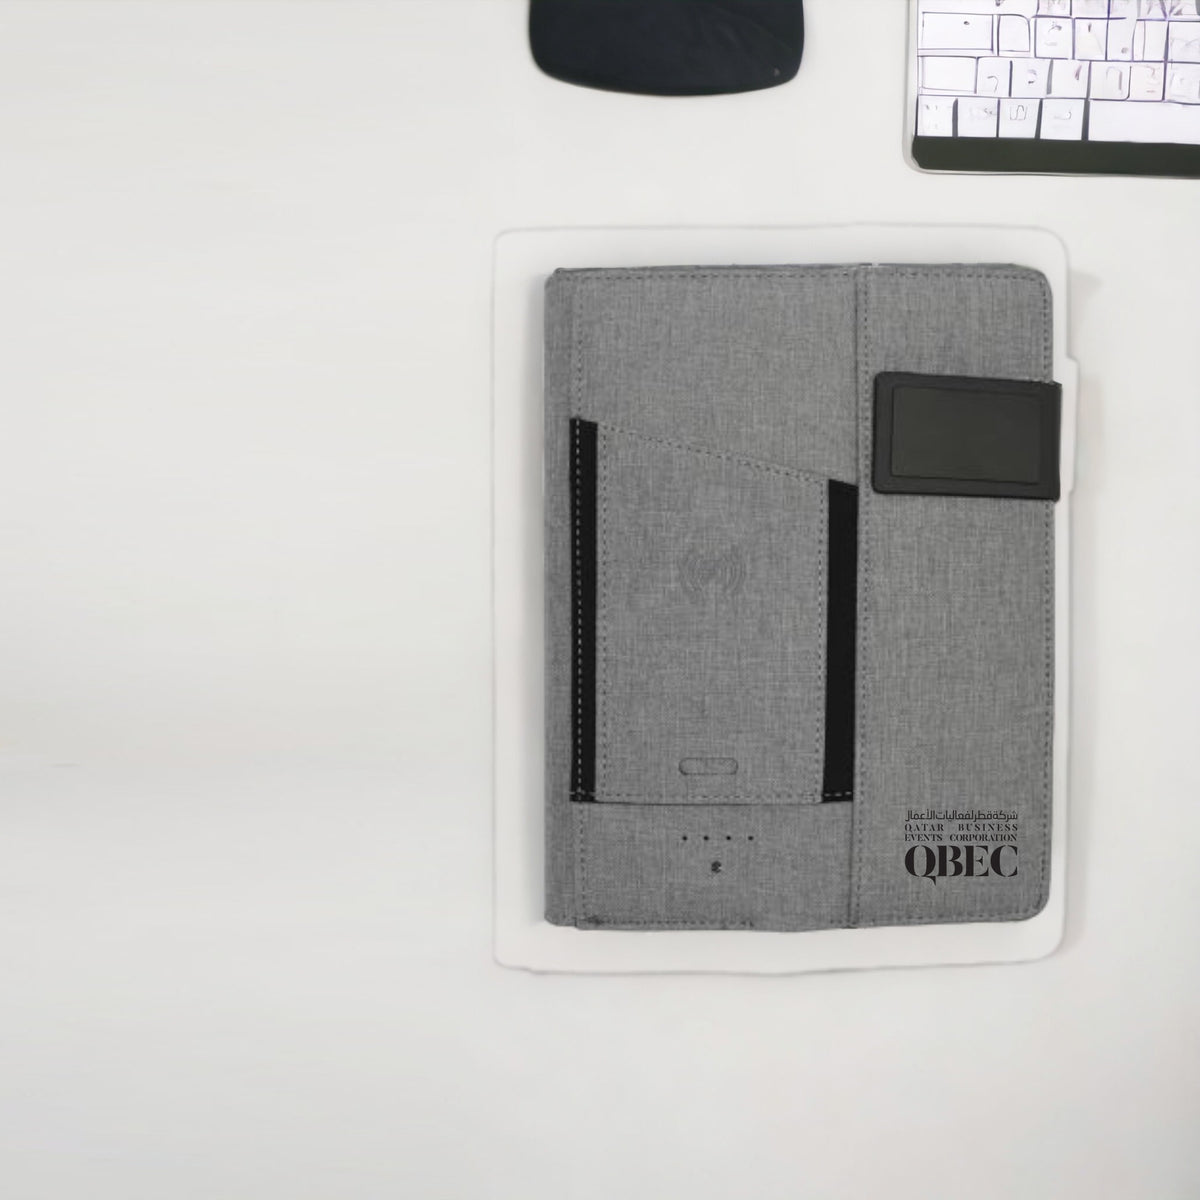 Fabric Organizer With Powerbank 4000mAh and Wireless charger